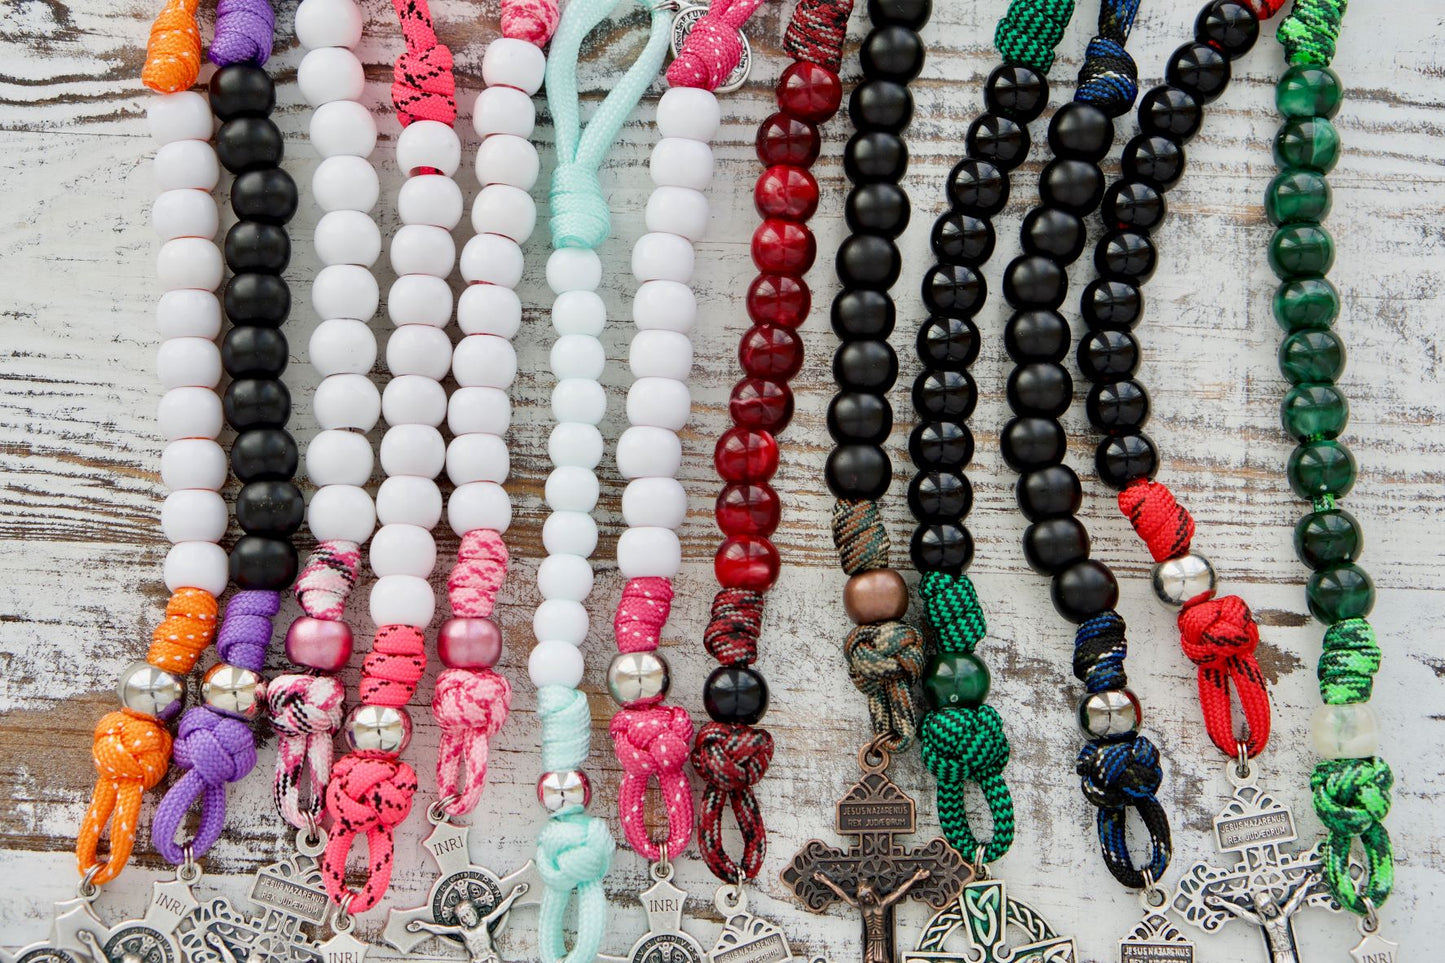 Customize your own 1 Decade Paracord Rosary with unique design elements, perfect for gifting or personal use, created by skilled Catholic artisans at Sanctus Servo.